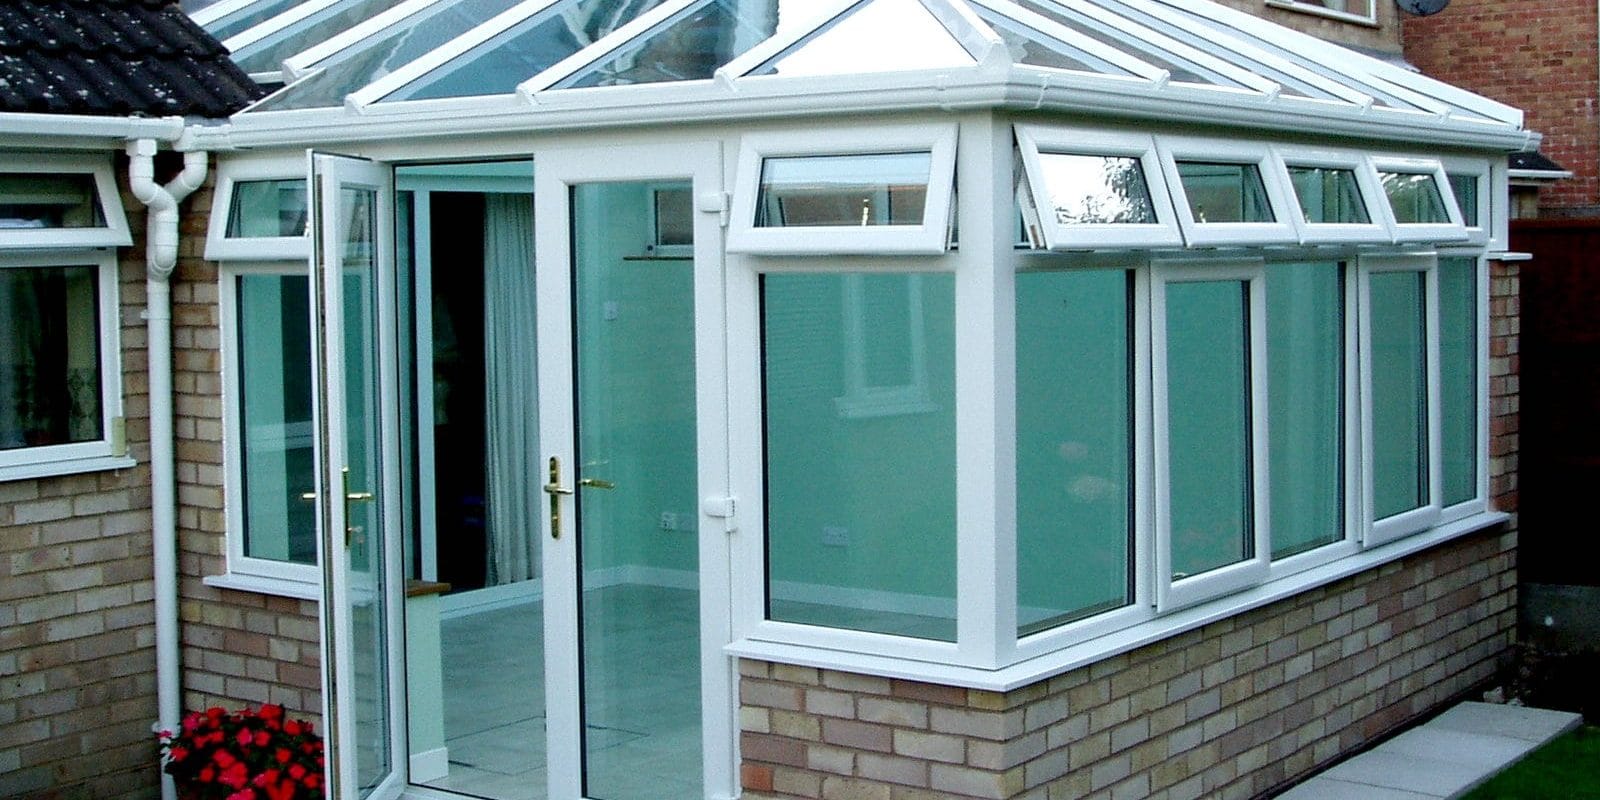 What type of conservatory would best suit my home?